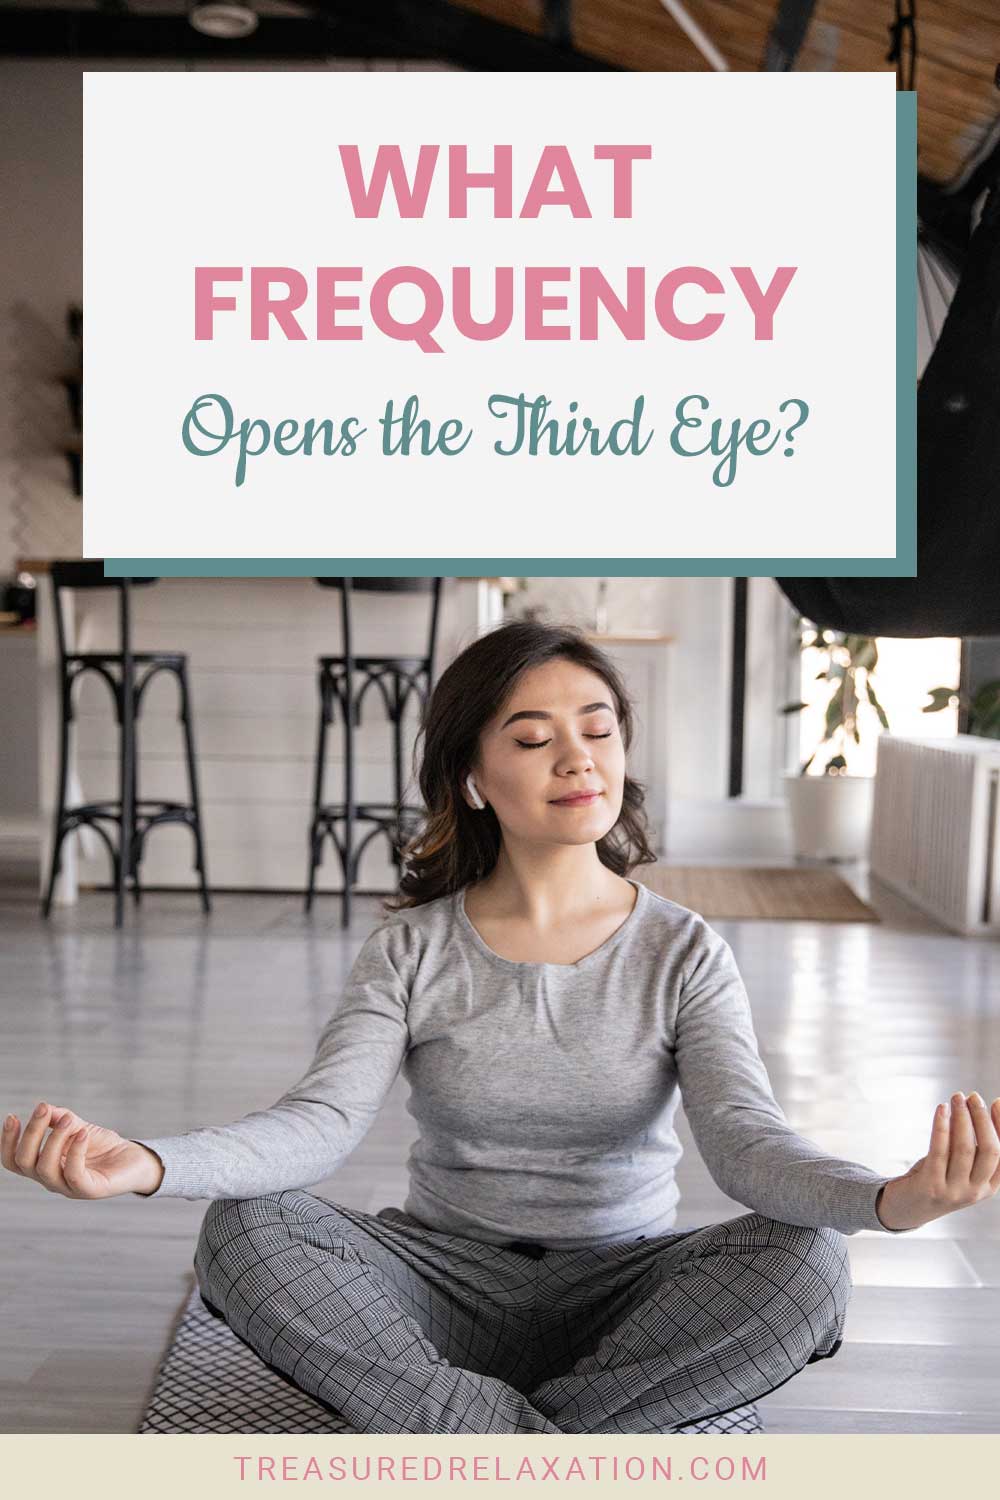 Woman meditating while listening to music with earbuds - What Frequency Opens the Third Eye?